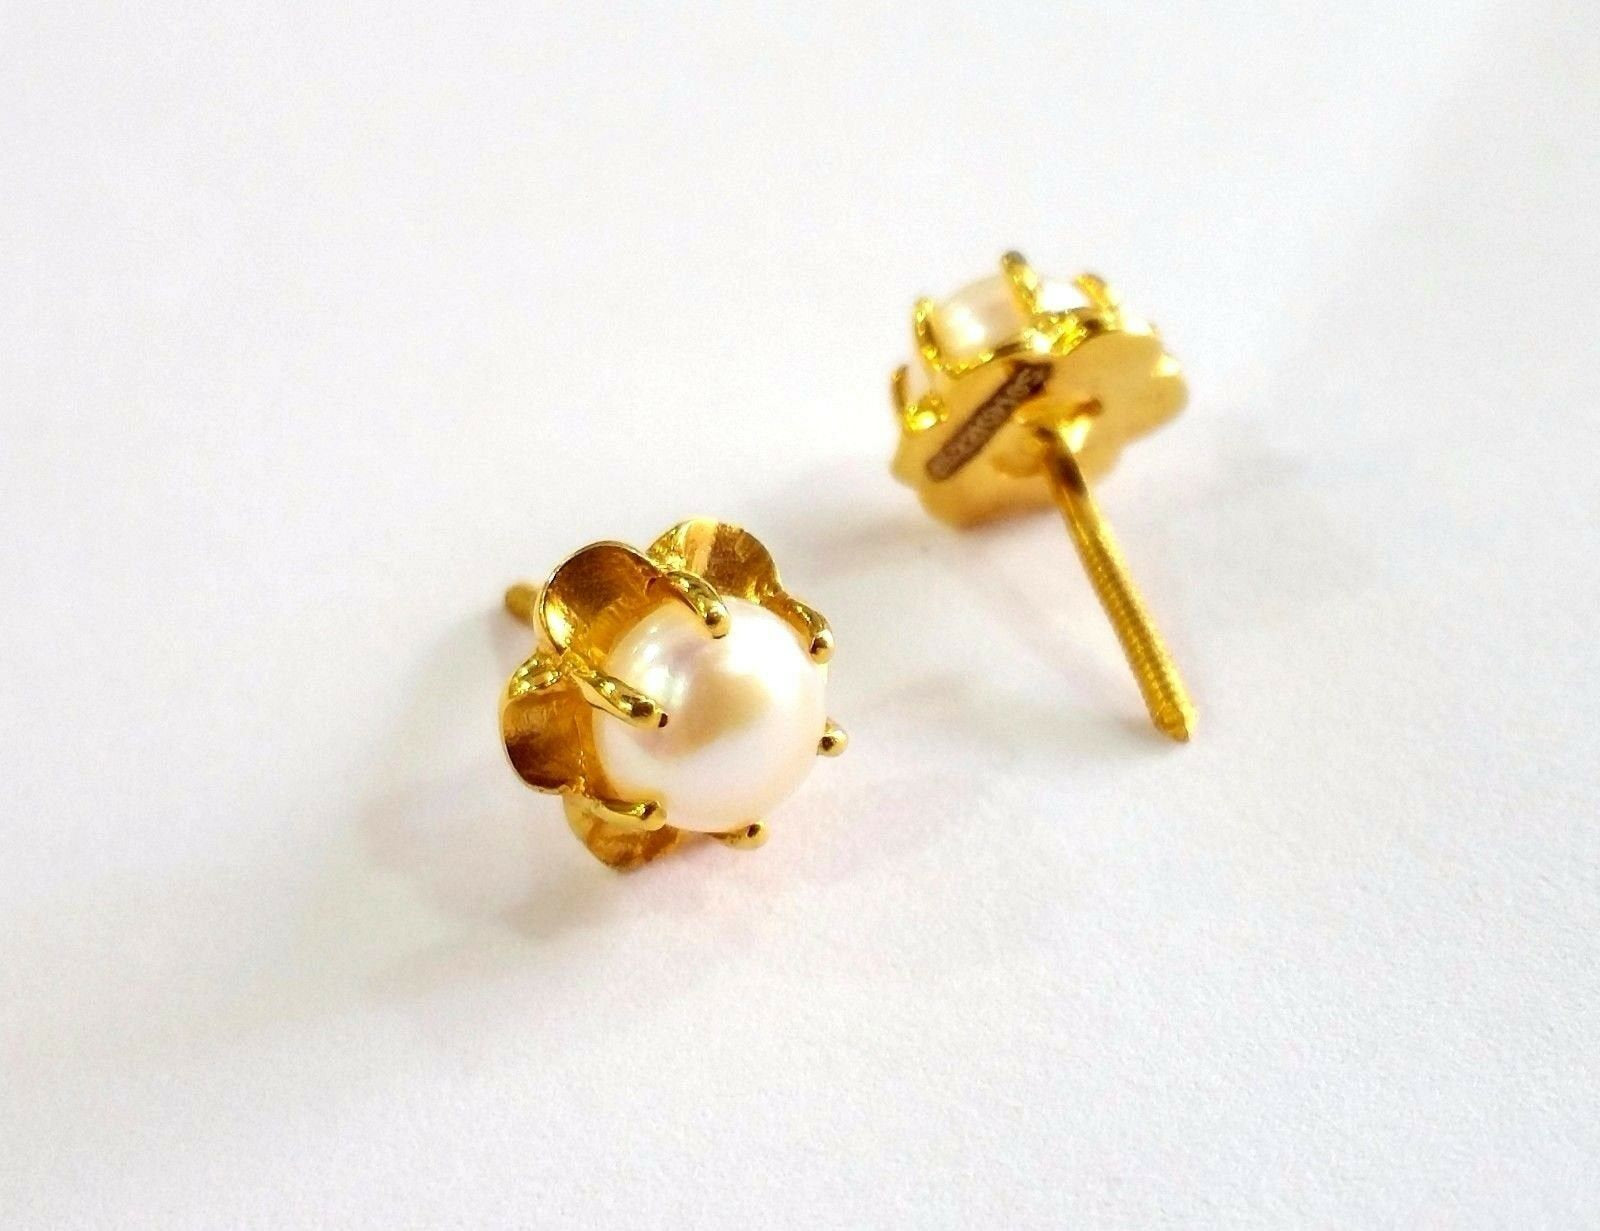 Vintage antique design handmade 22kt yellow gold fabulous pearl stud earring for unisex jewelry from india - TRIBAL ORNAMENTS